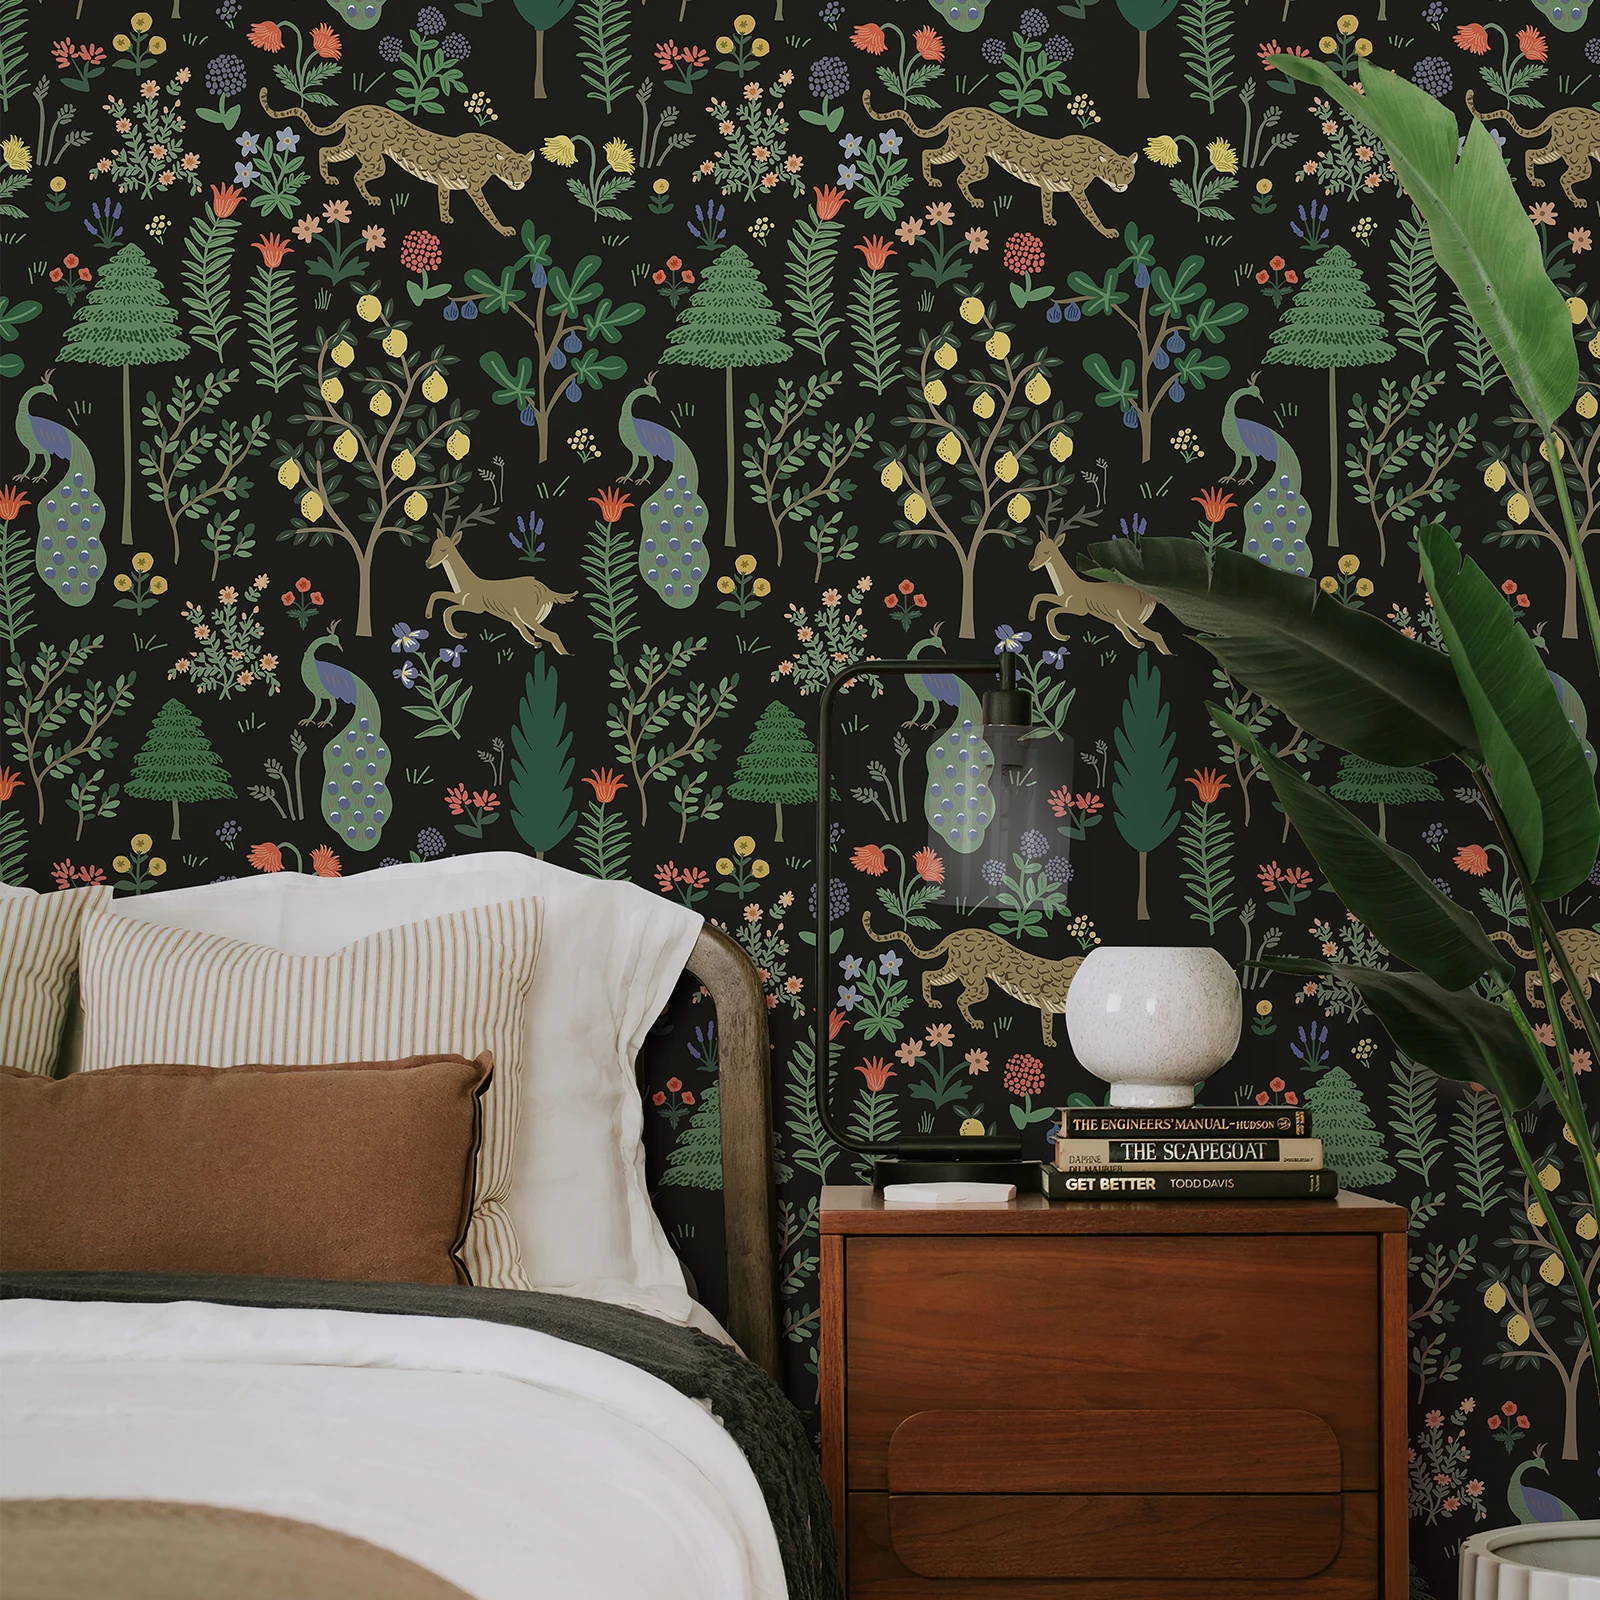 

Vintage Leaves Trees Peel And Stick Wallpaper Retro Floral Yellow Animal Waterproof Home Decor Forest Self Adhesive Wall Sticker